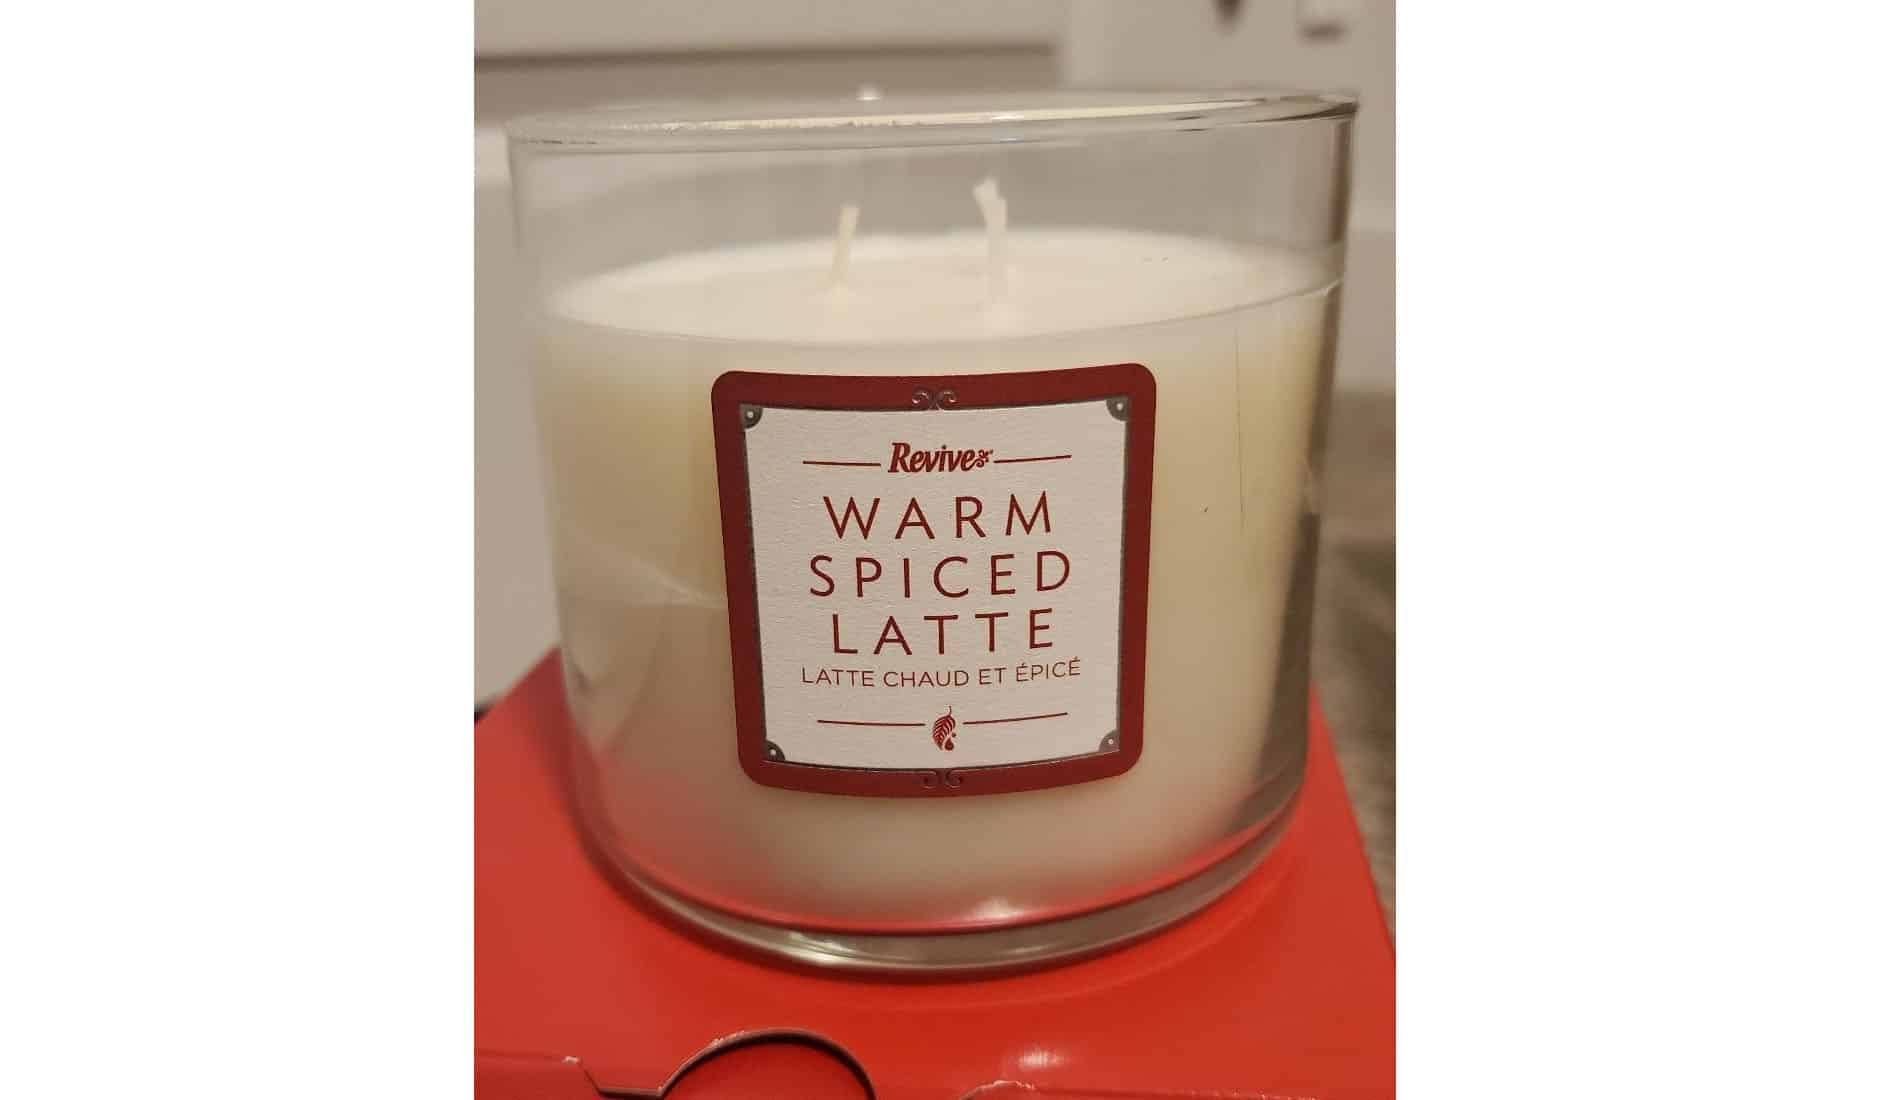 recalled_candle